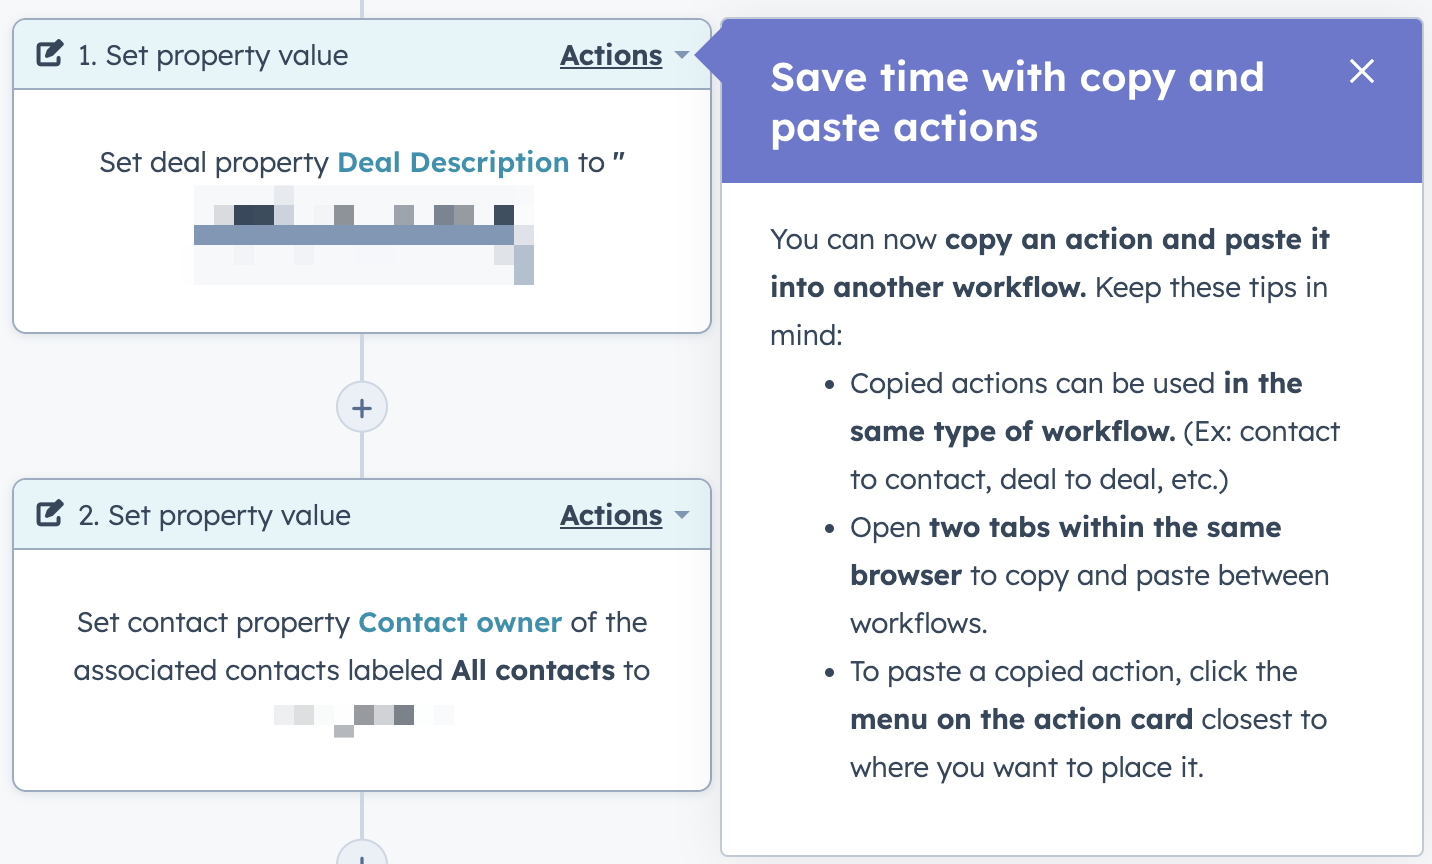 Workflow Action Copy and Paste between workflows